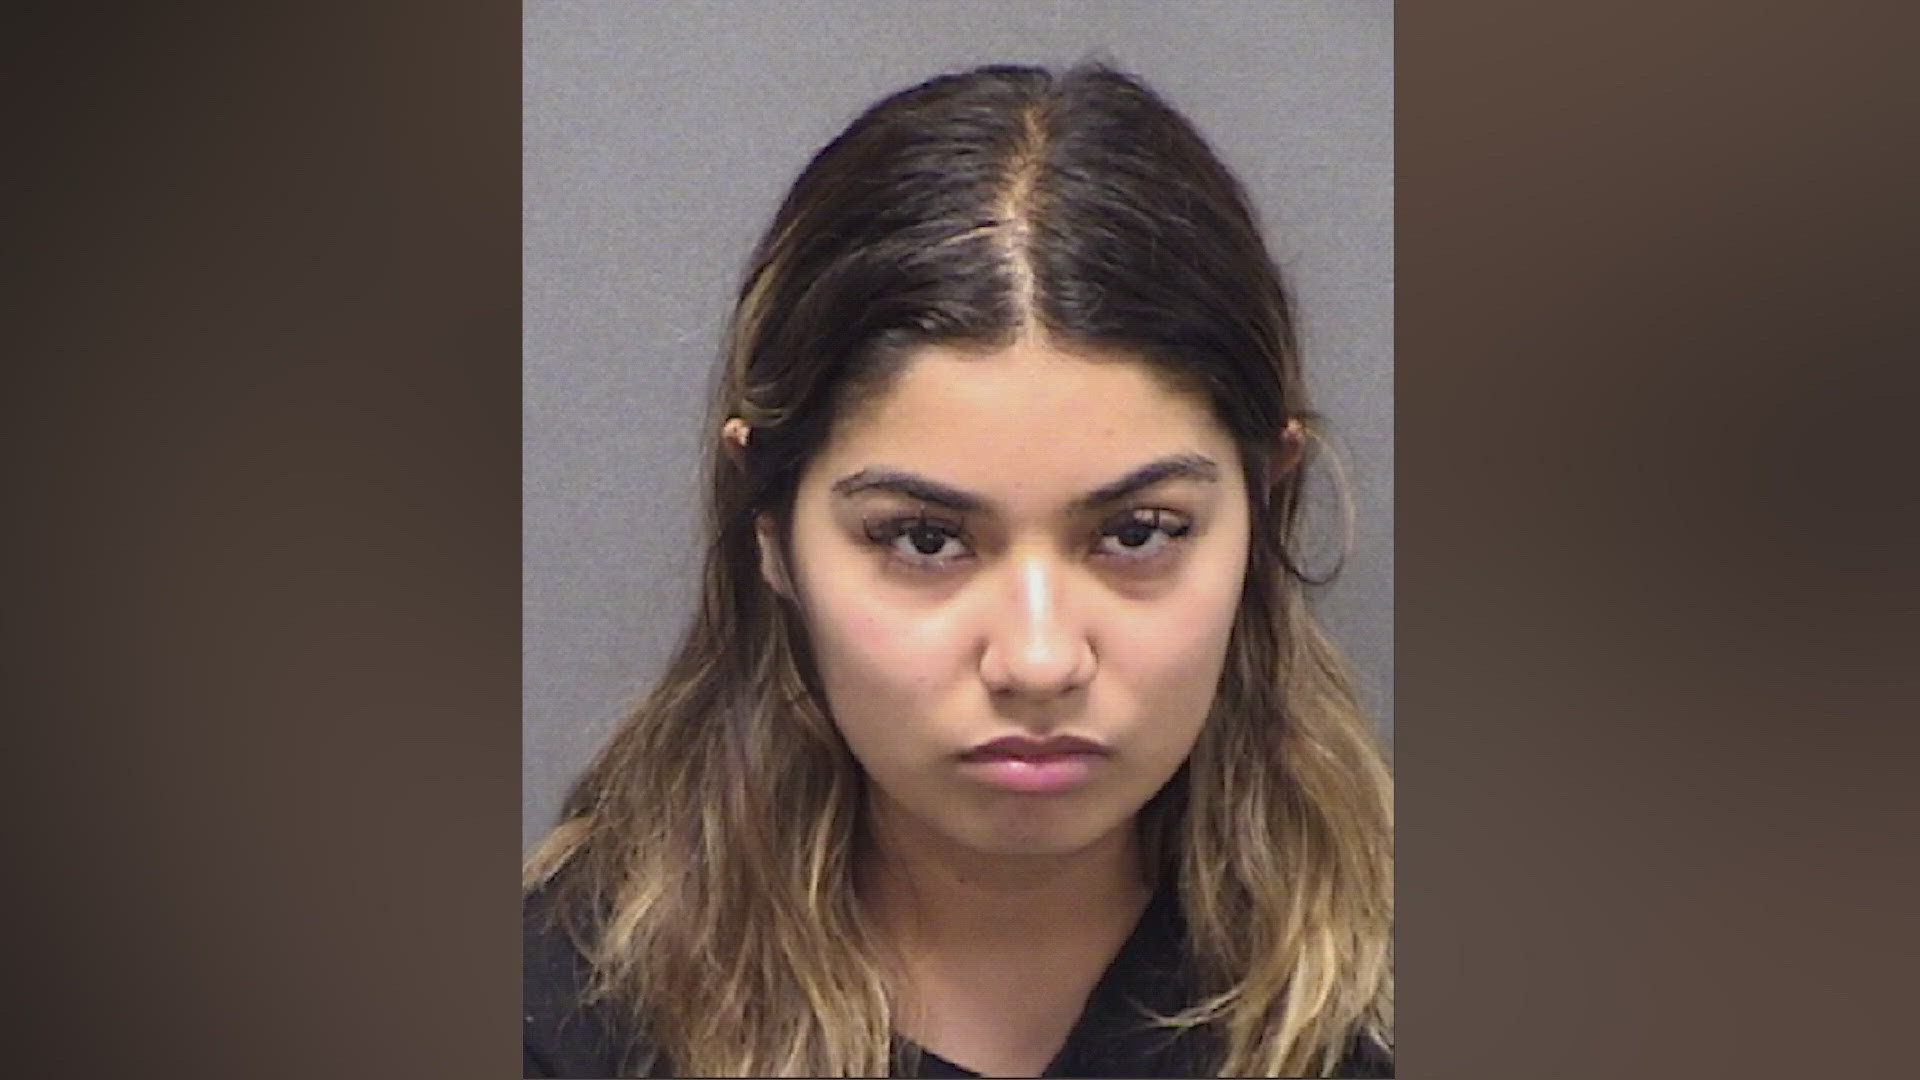 H-E-B of accused to threats, sending employee bomb coworkers disturbing photos